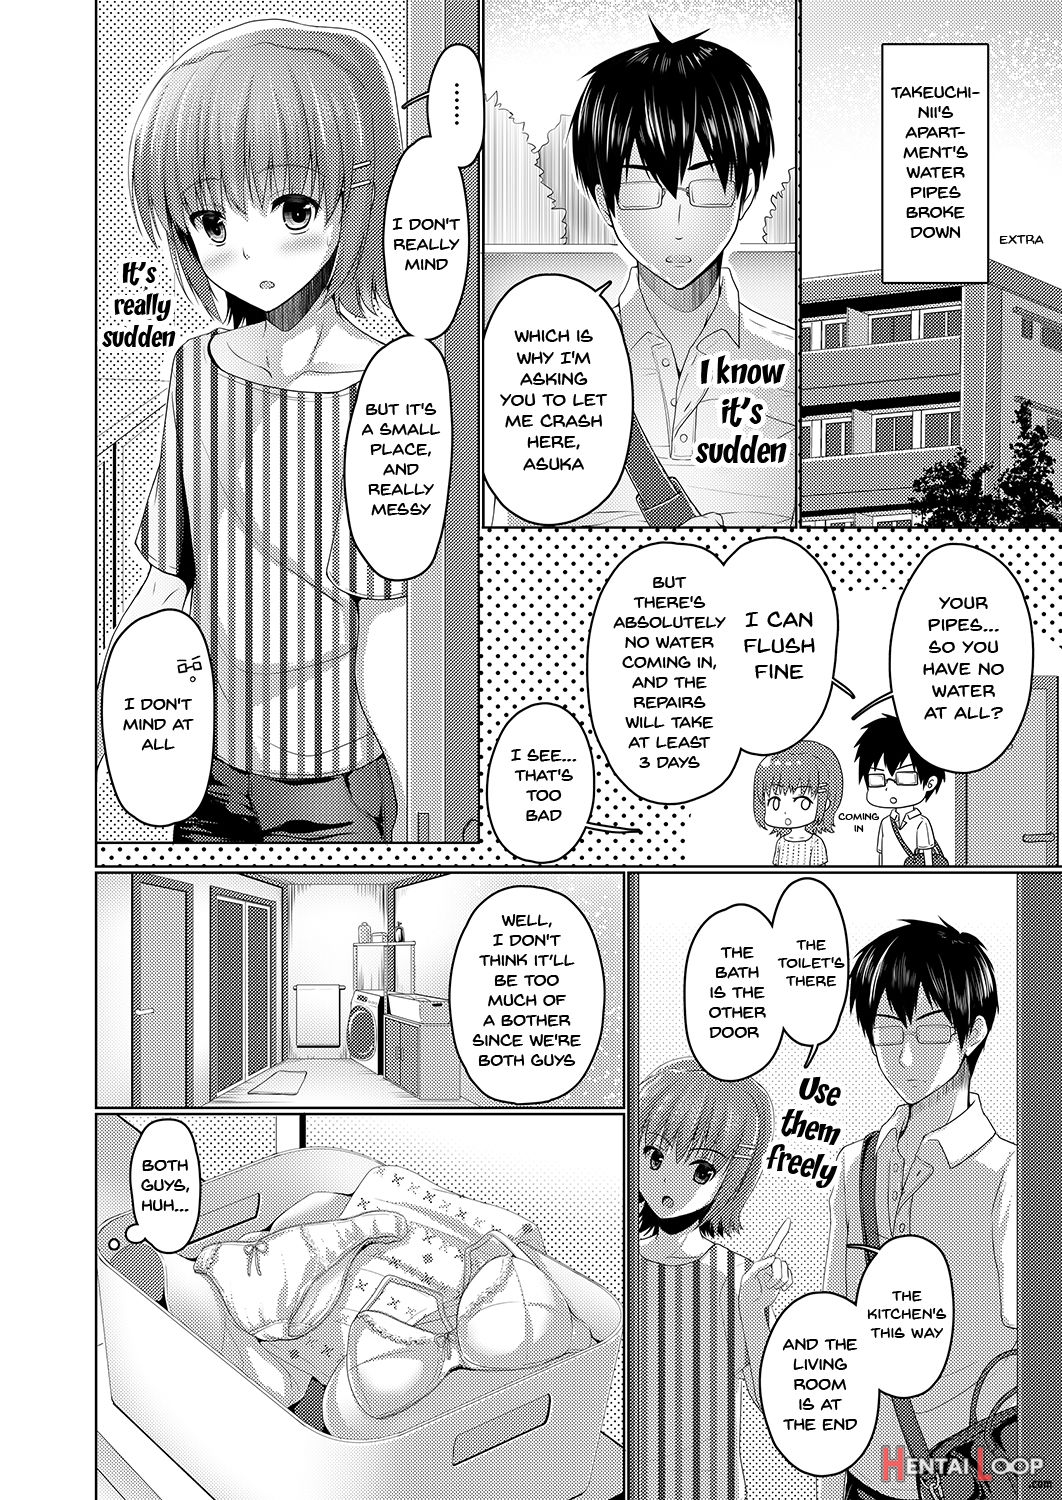 An Eroge Writer Whose Work Never Sells Decided To Crossdress So He Could Understand How Women Feel page 2